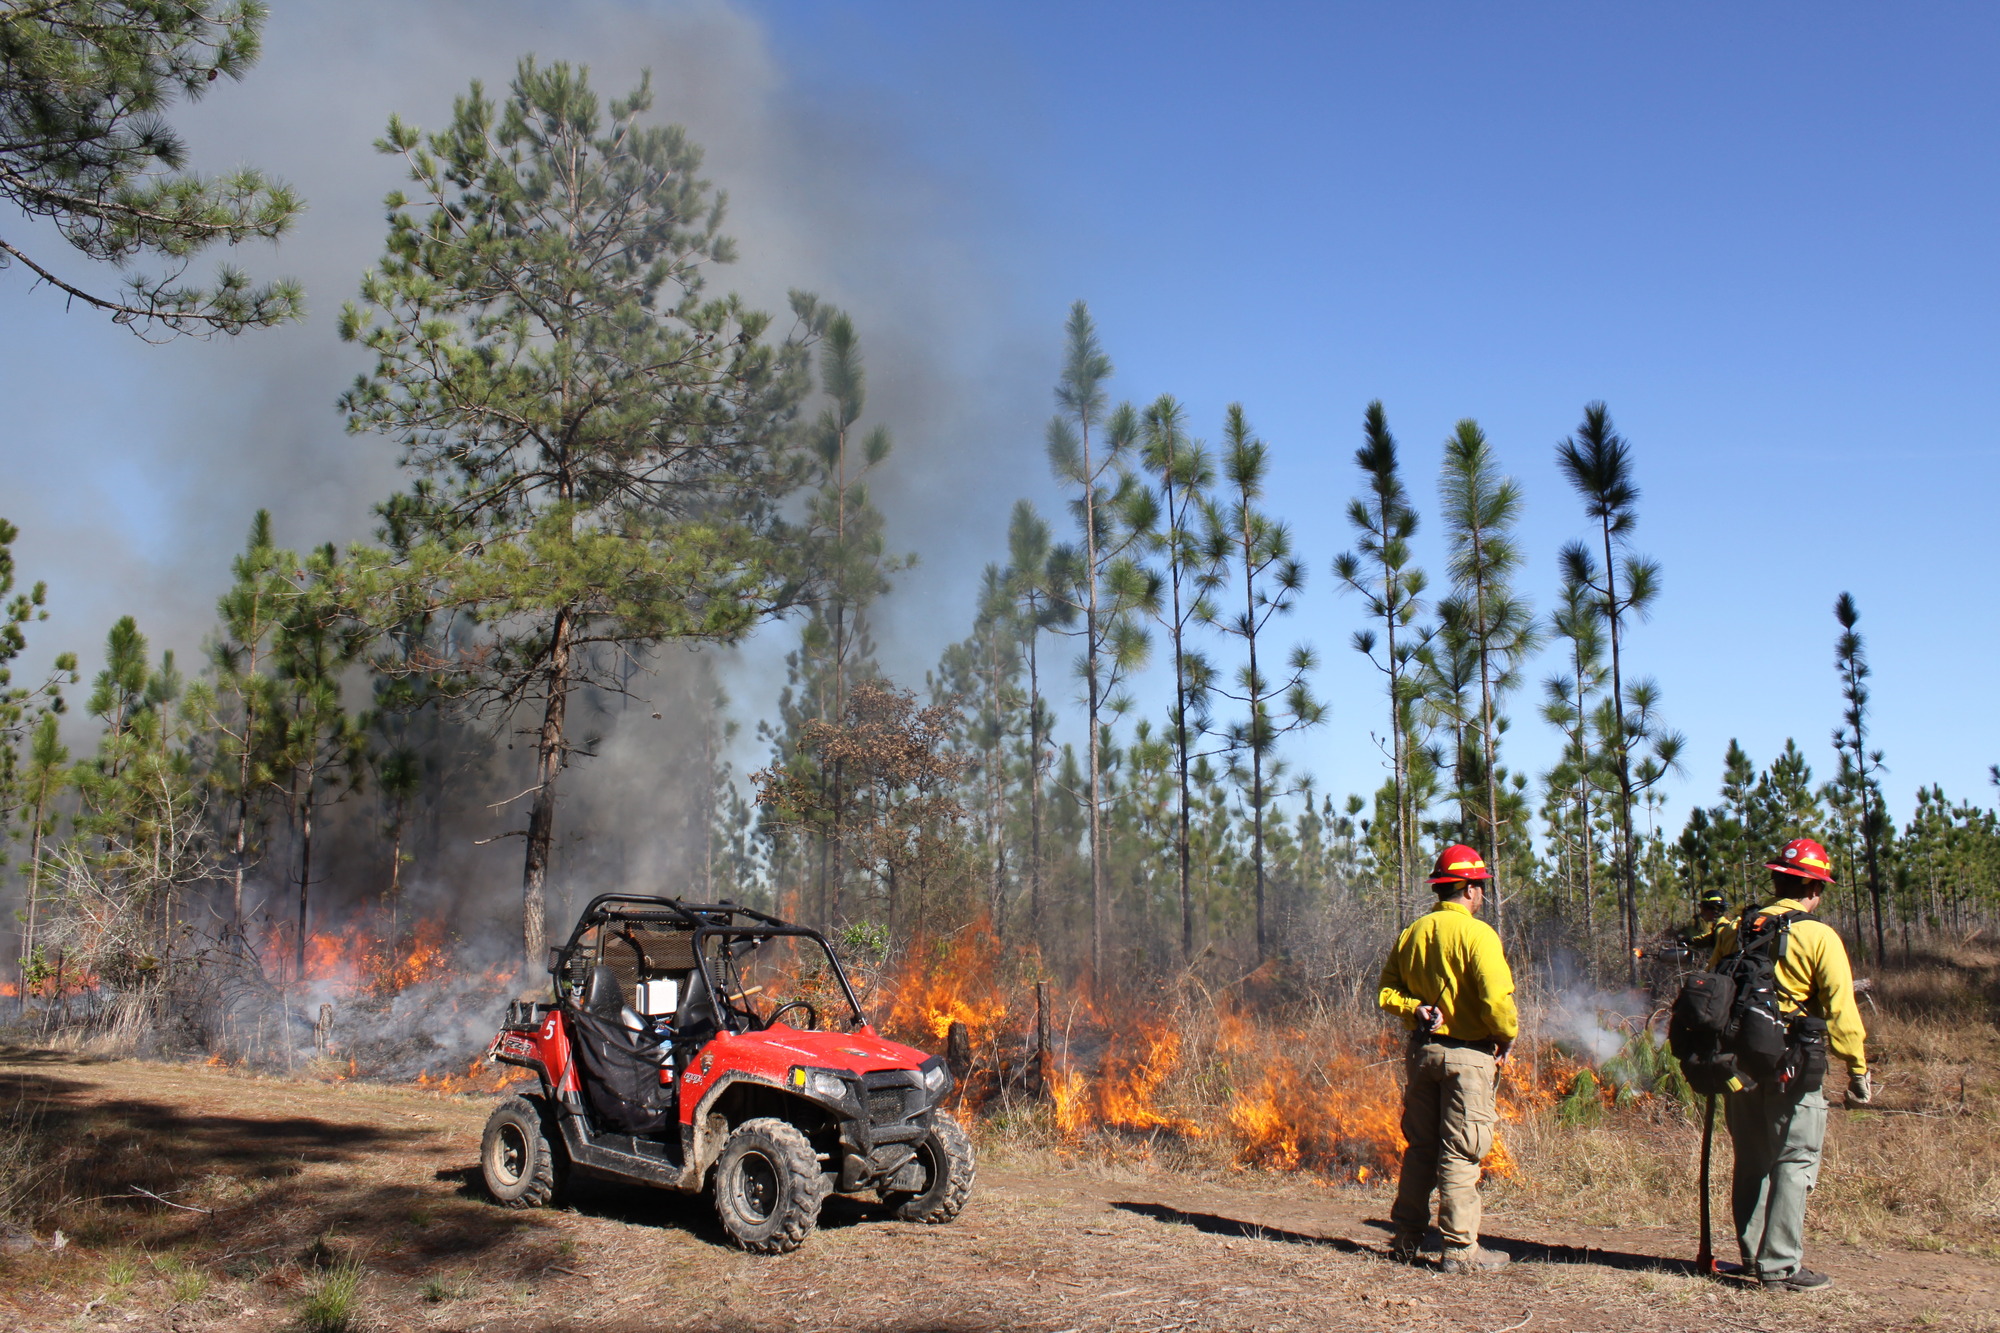 2 firefighters stand next to an all terrain vehicle while a small fire creeps through grasses and young trees